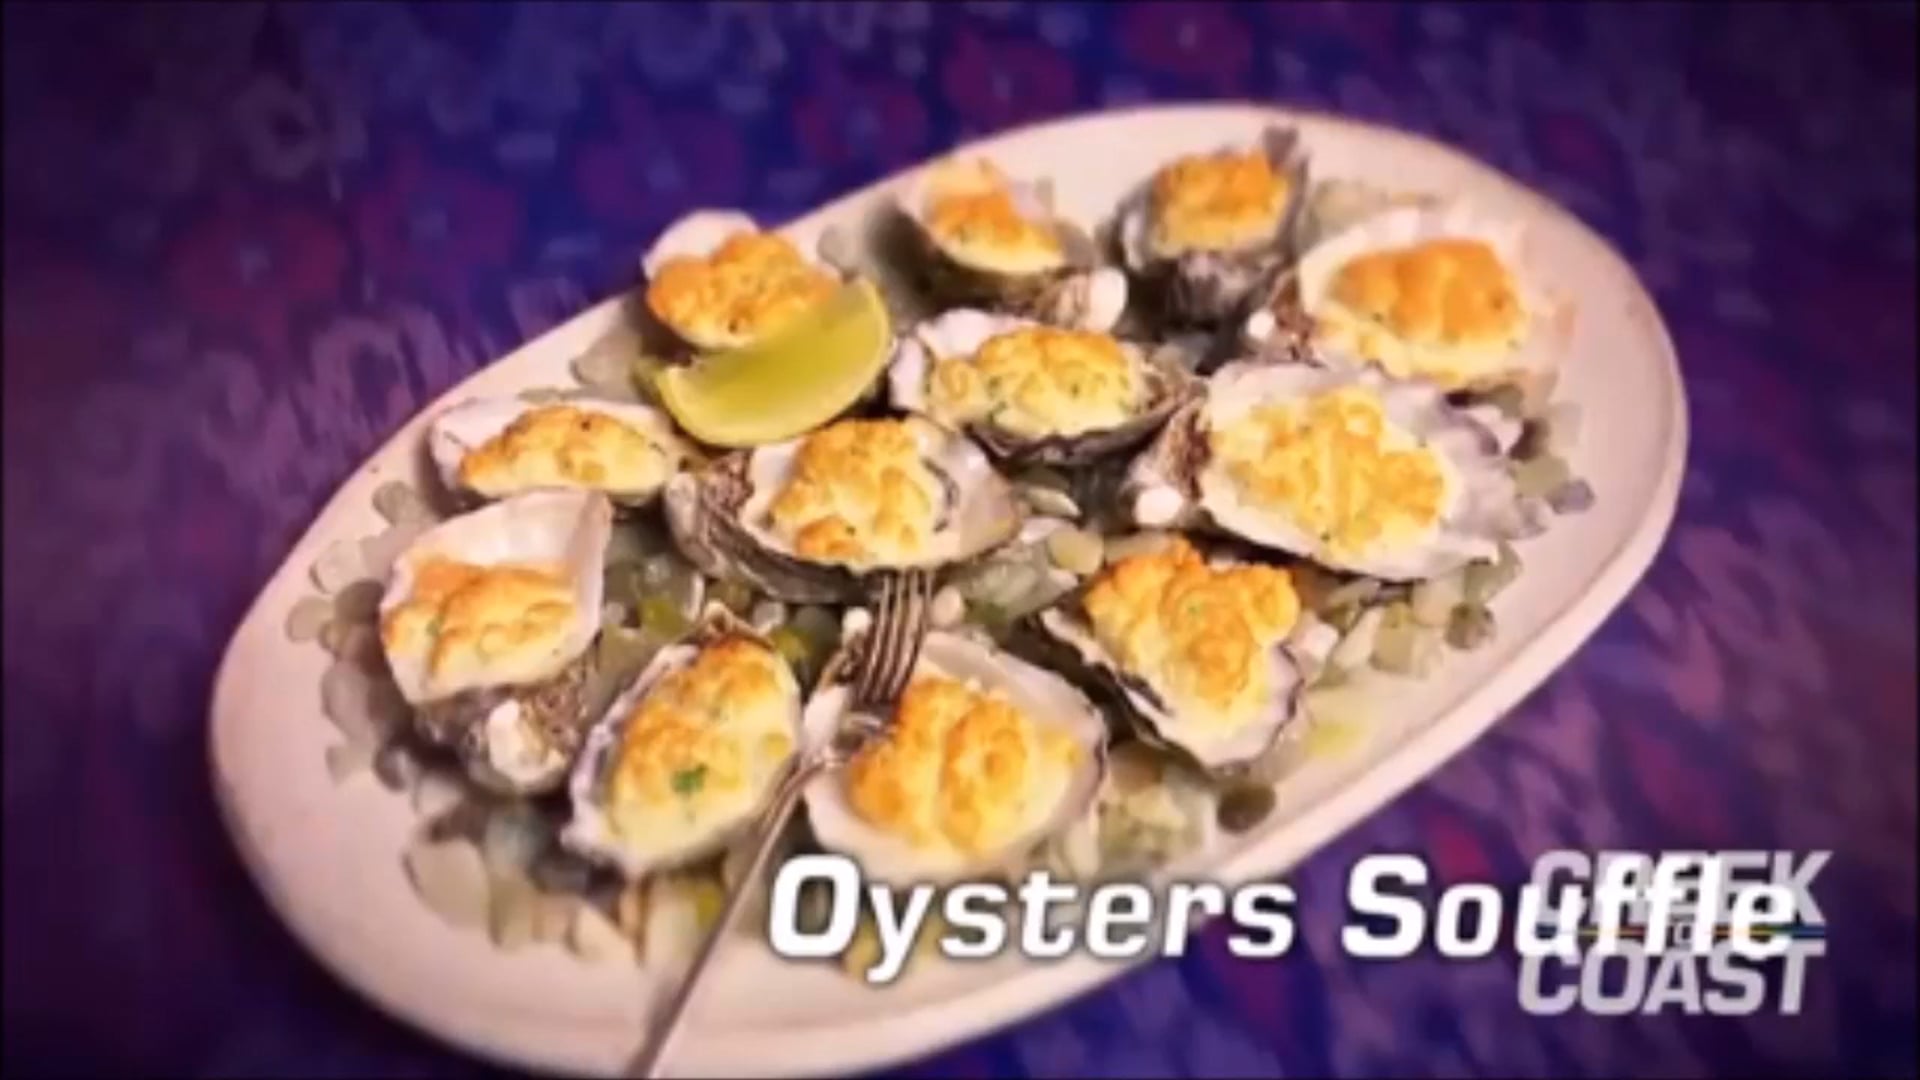 Oysters Souffle – Sally Jenyns